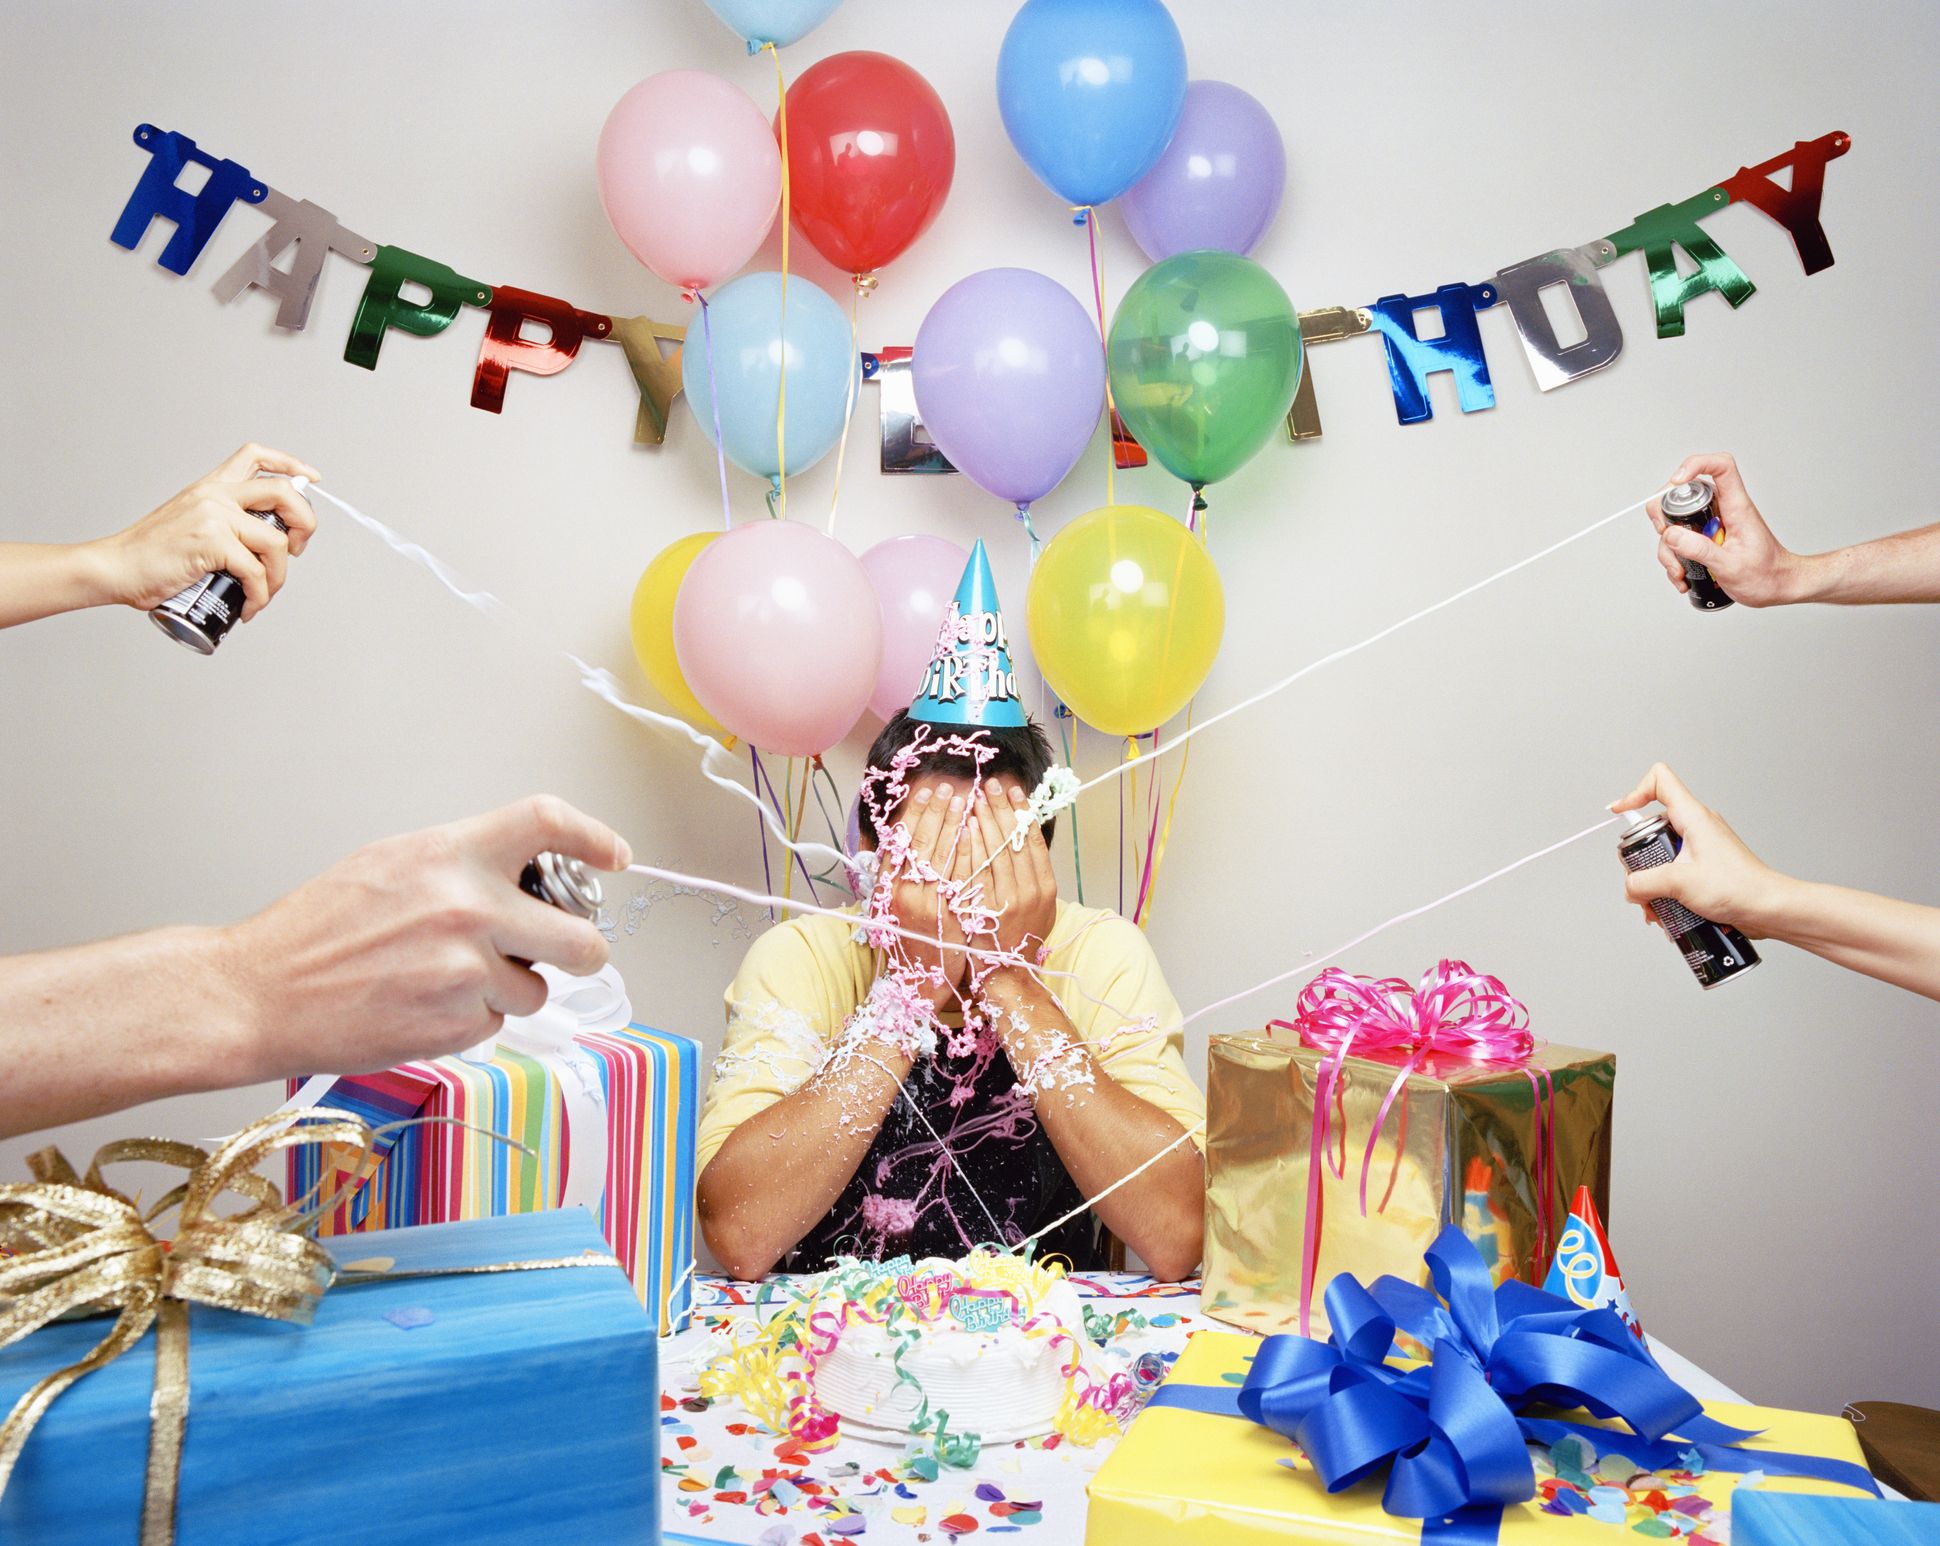 50 Best Birthday Captions for Instagram - Cute and Funny Birthday Instagram  Captions